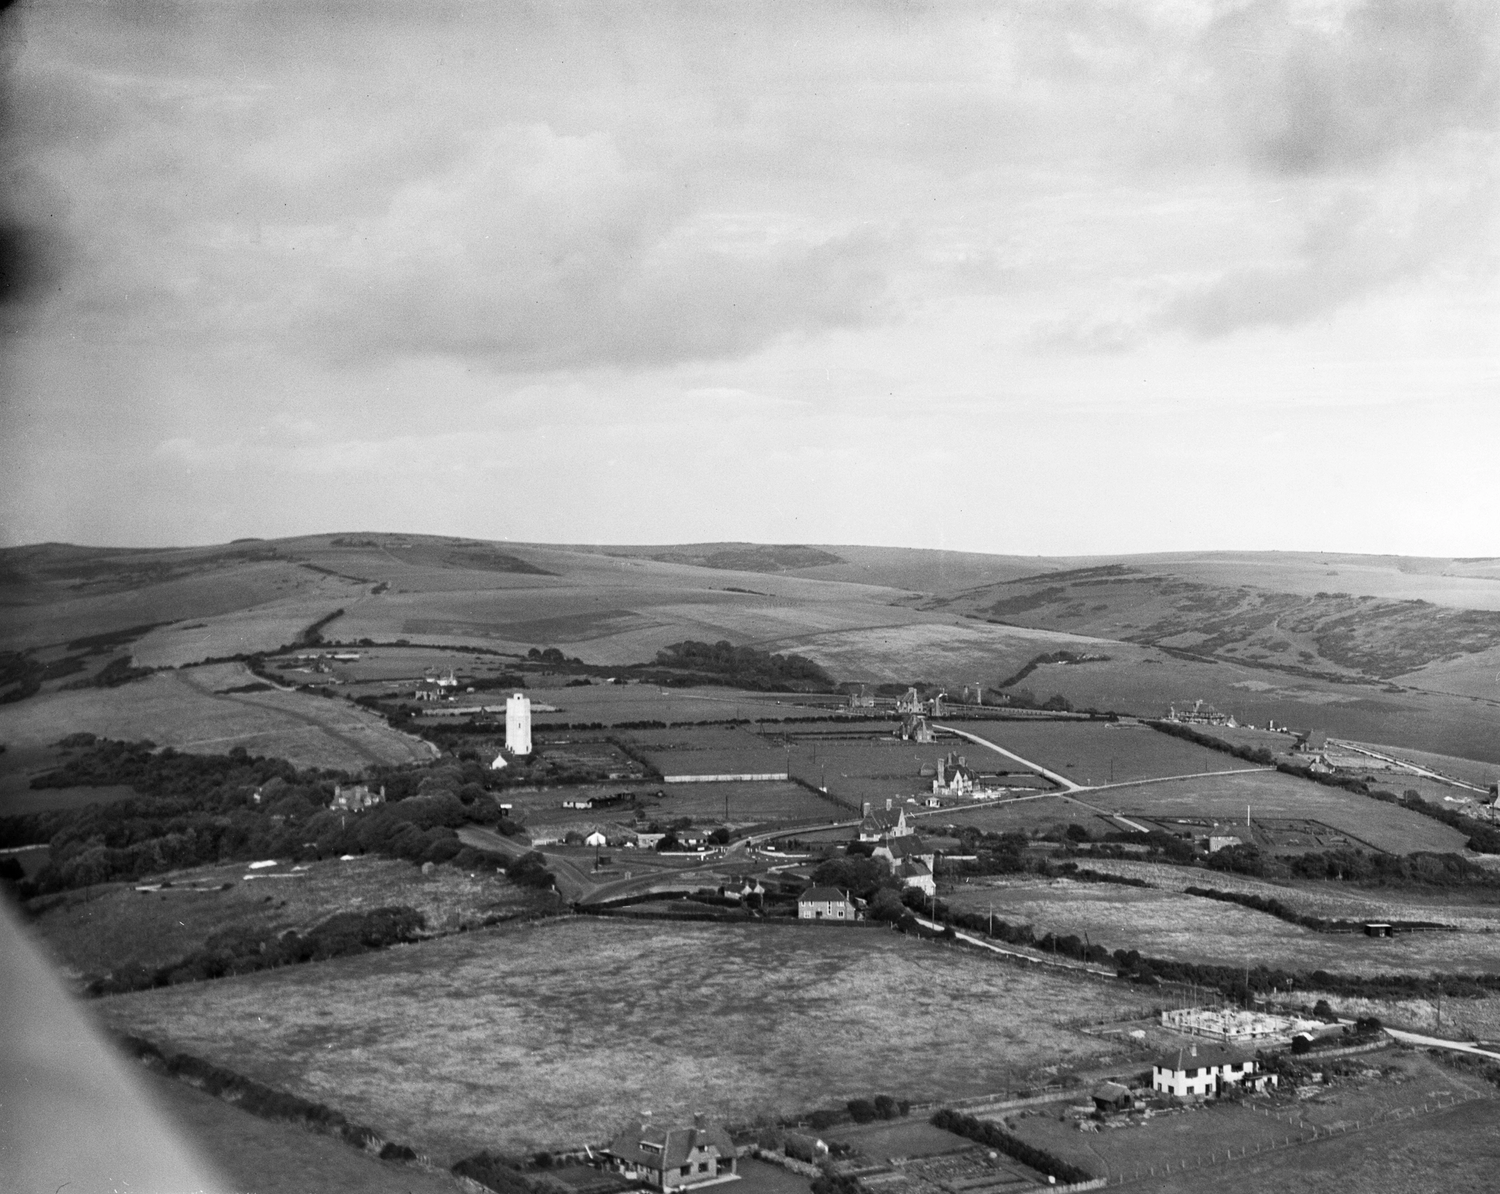 Black and white picture of Friston Forst as heathland back in the 1930's